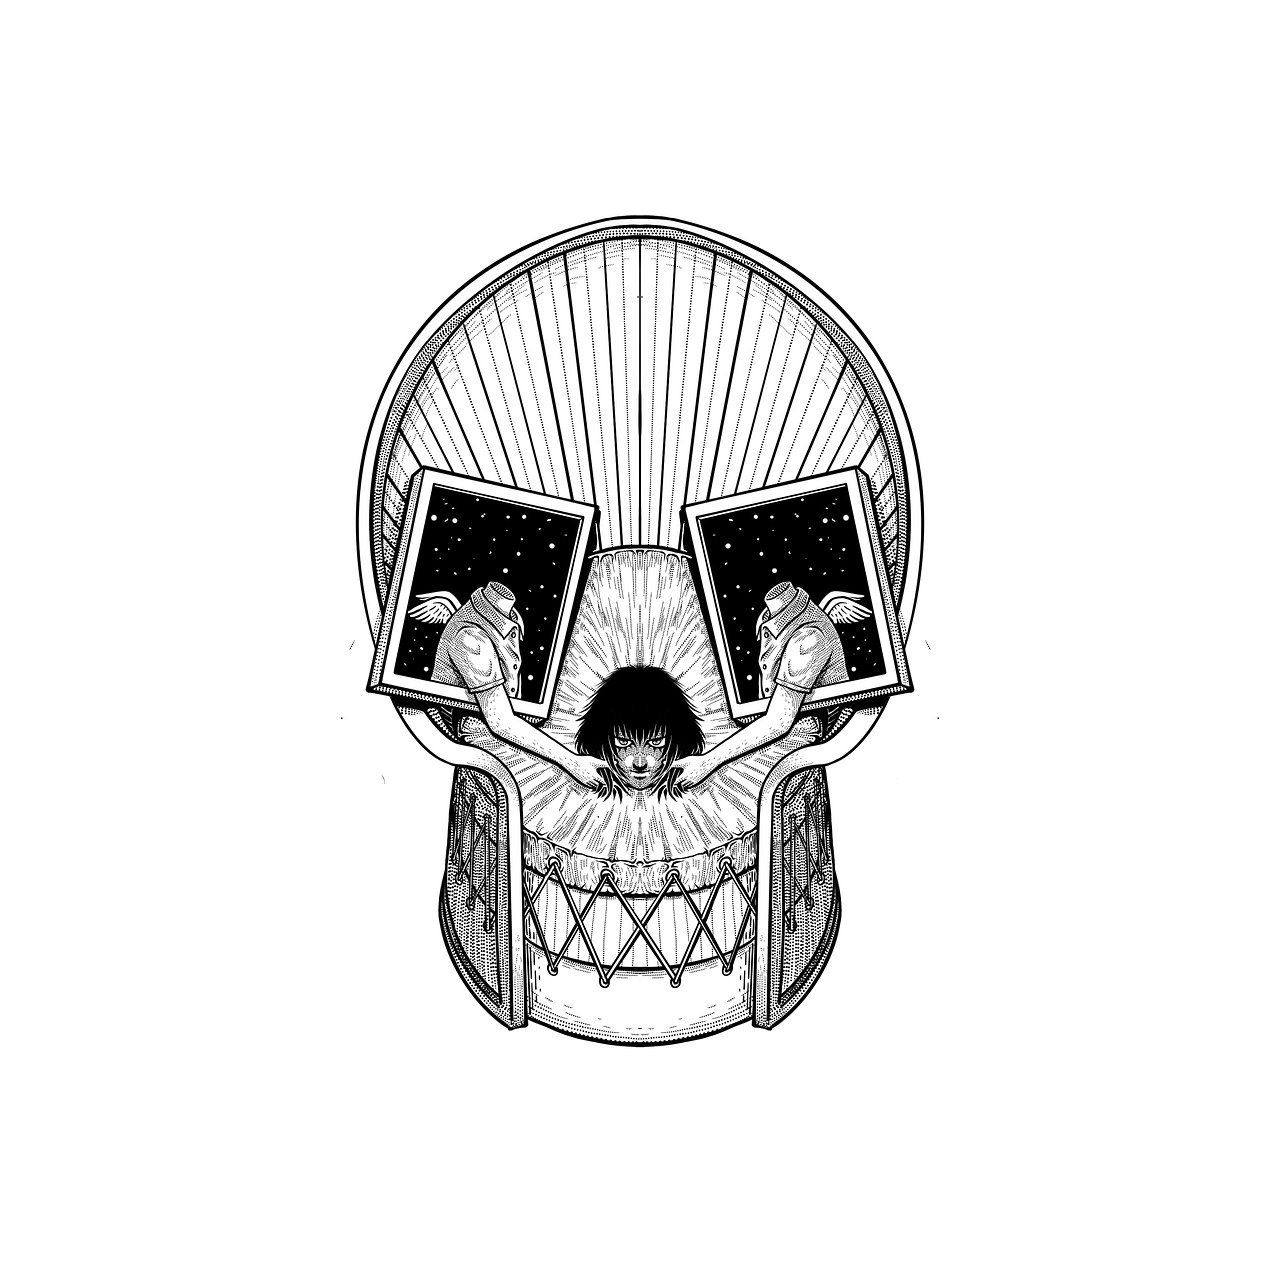 a black and white drawing of a human skull, by Adam Marczyński, beneath the stars, skeleton drummer, symmetrical digital illustration, neil young design